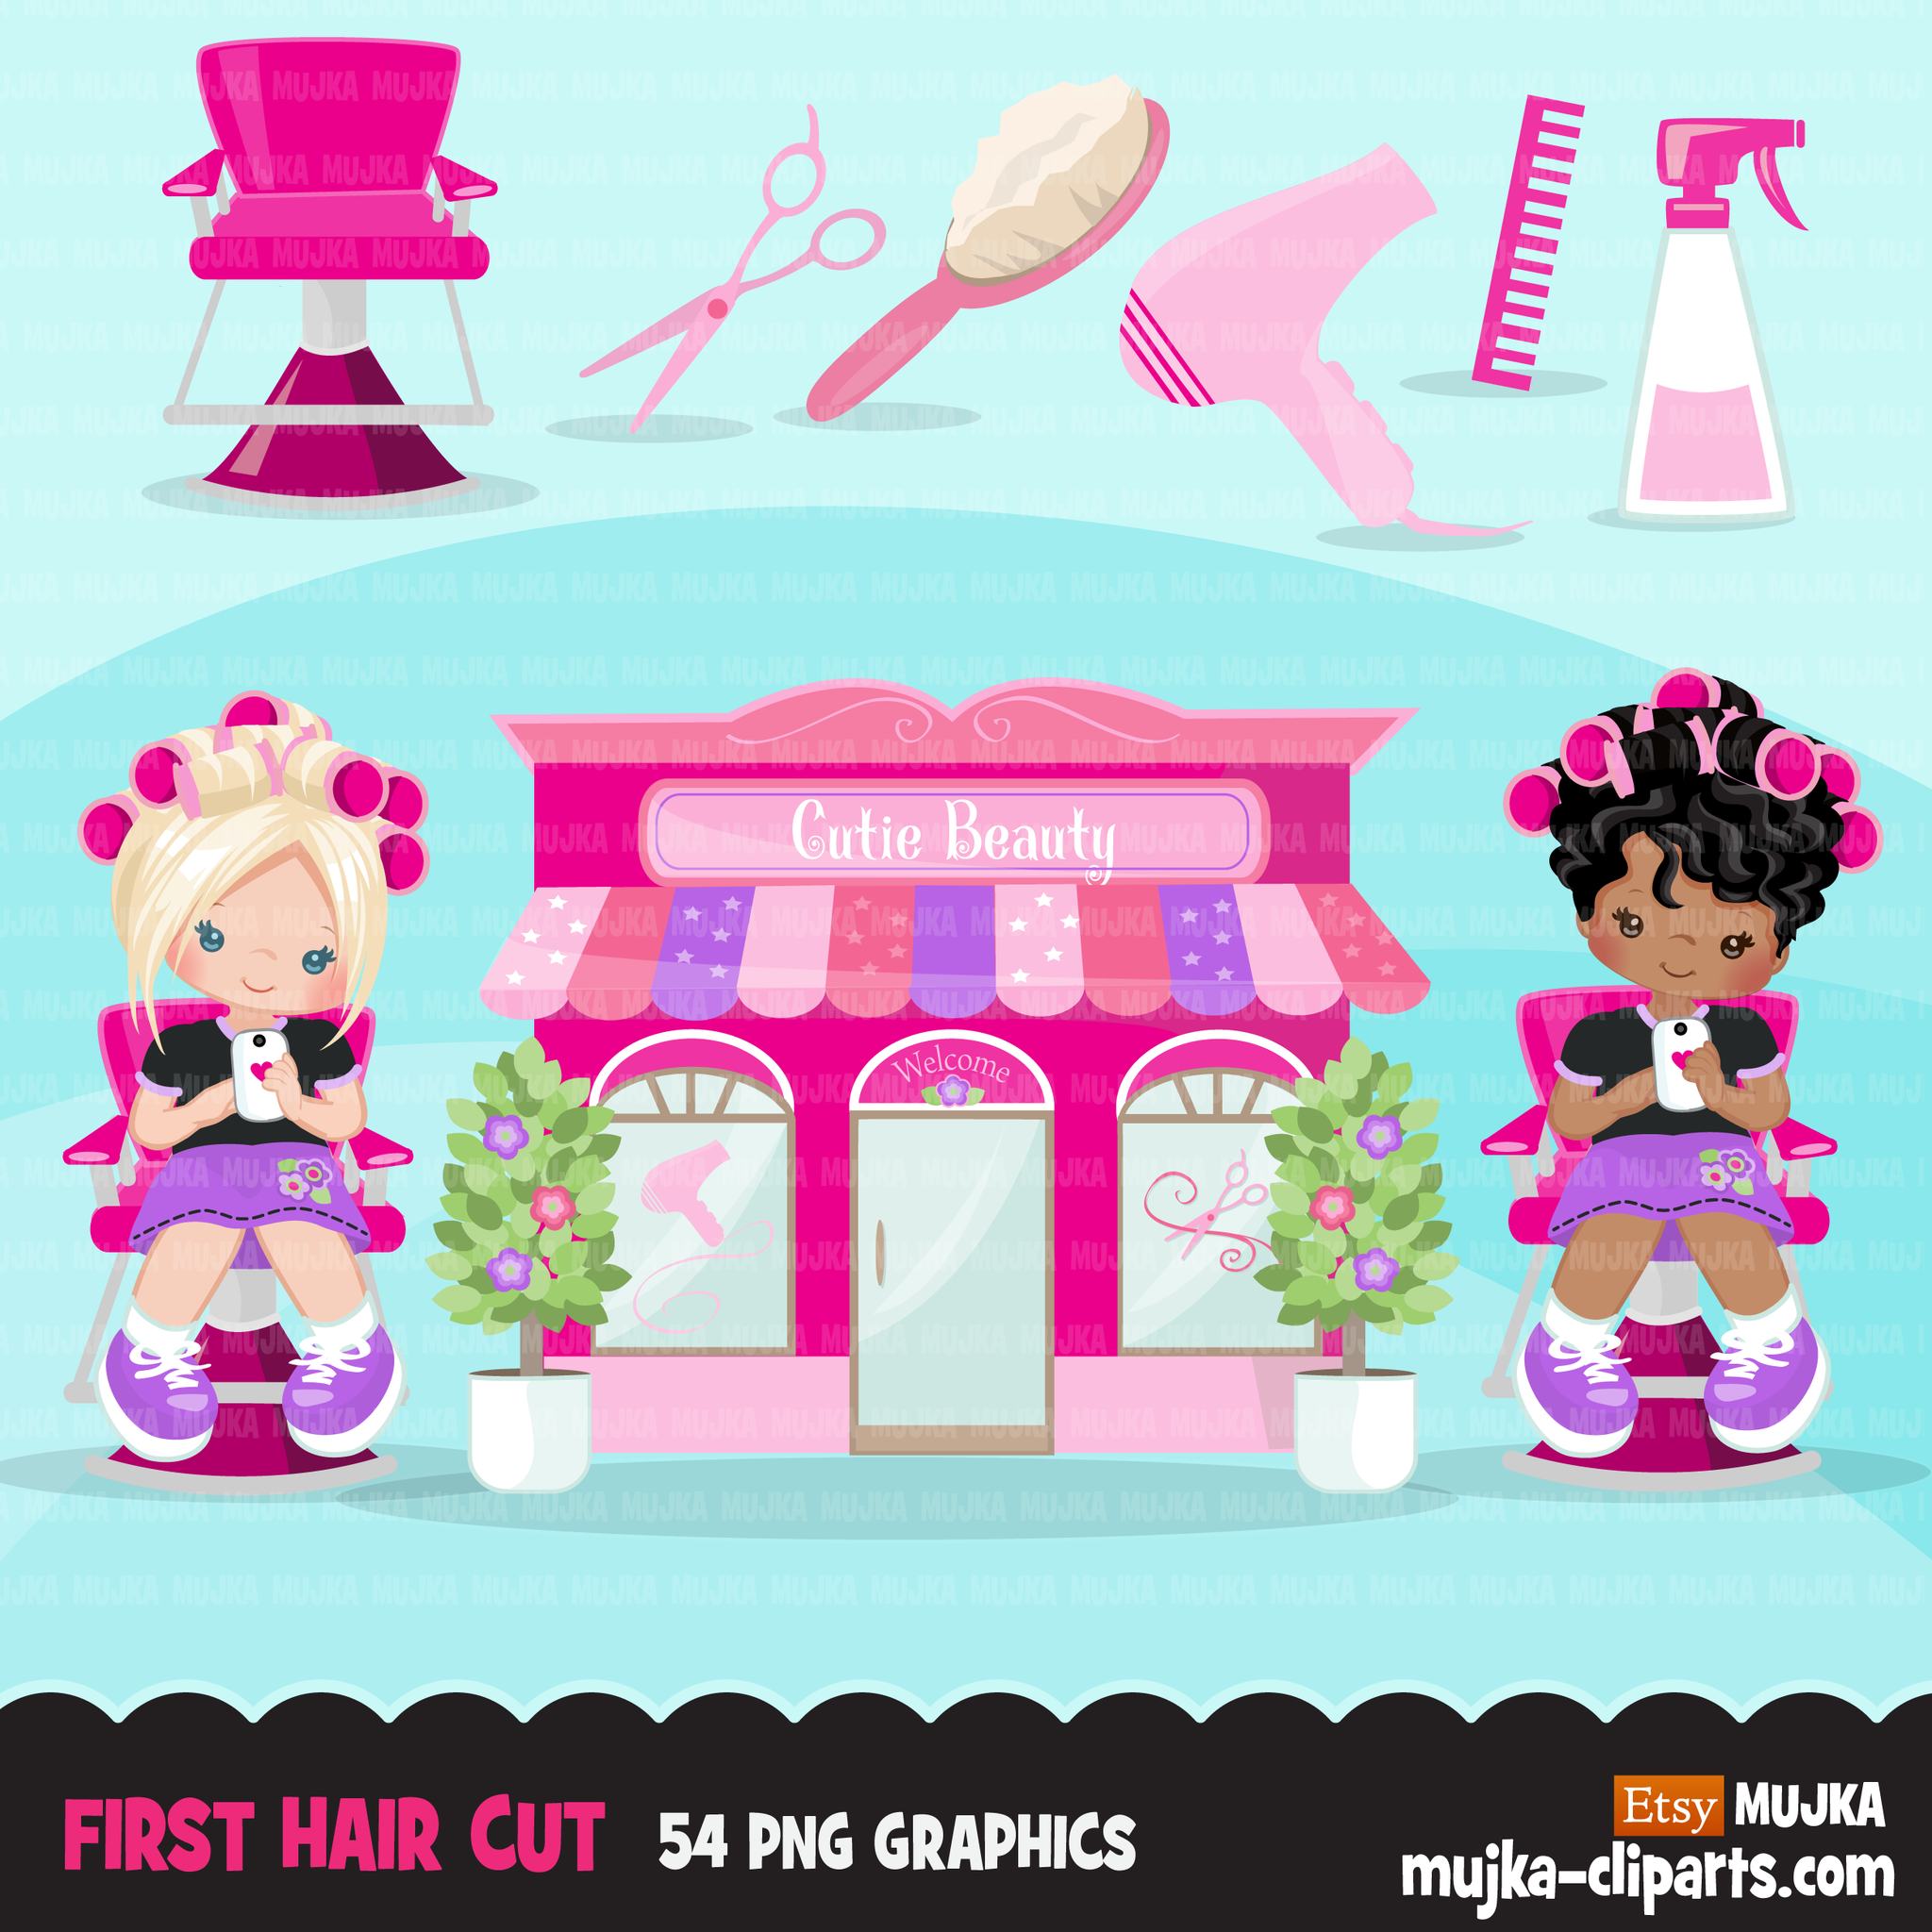 Hairstyle, barbershop, beauty salon clipart, my first haircut graphics